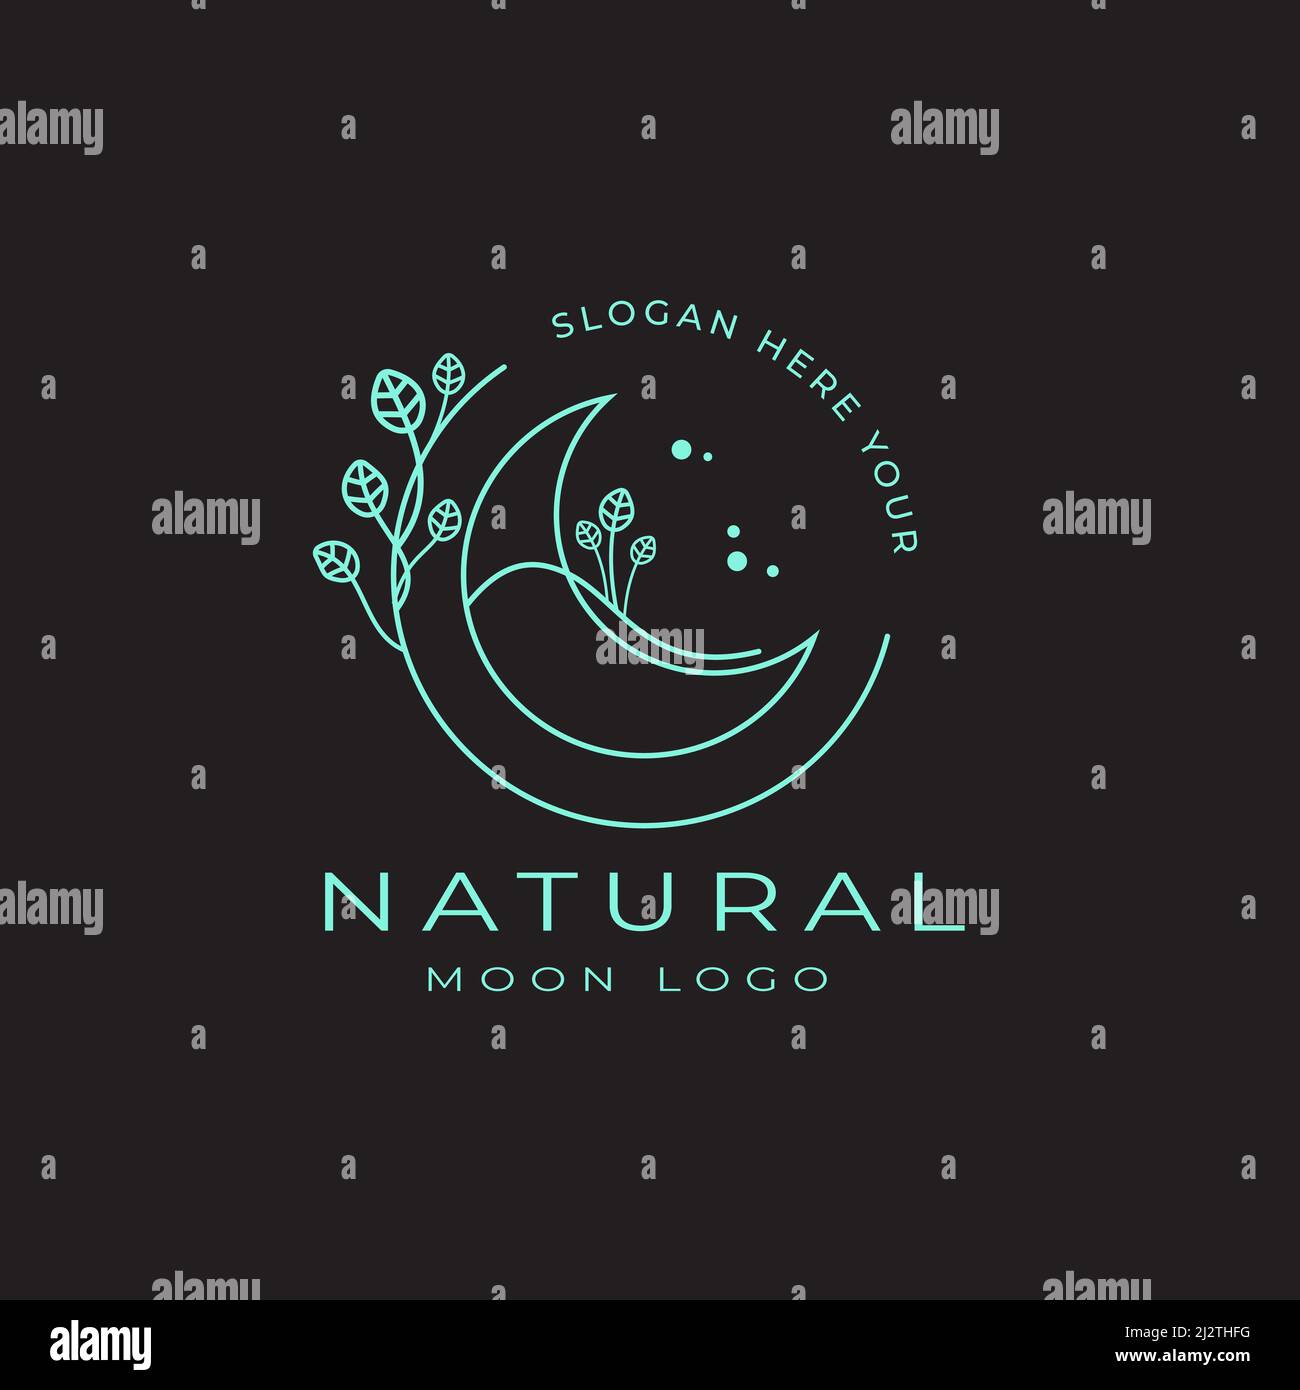 Elegant crescent moon illustration and floral logo design line icon vector in luxury linear style Stock Vector